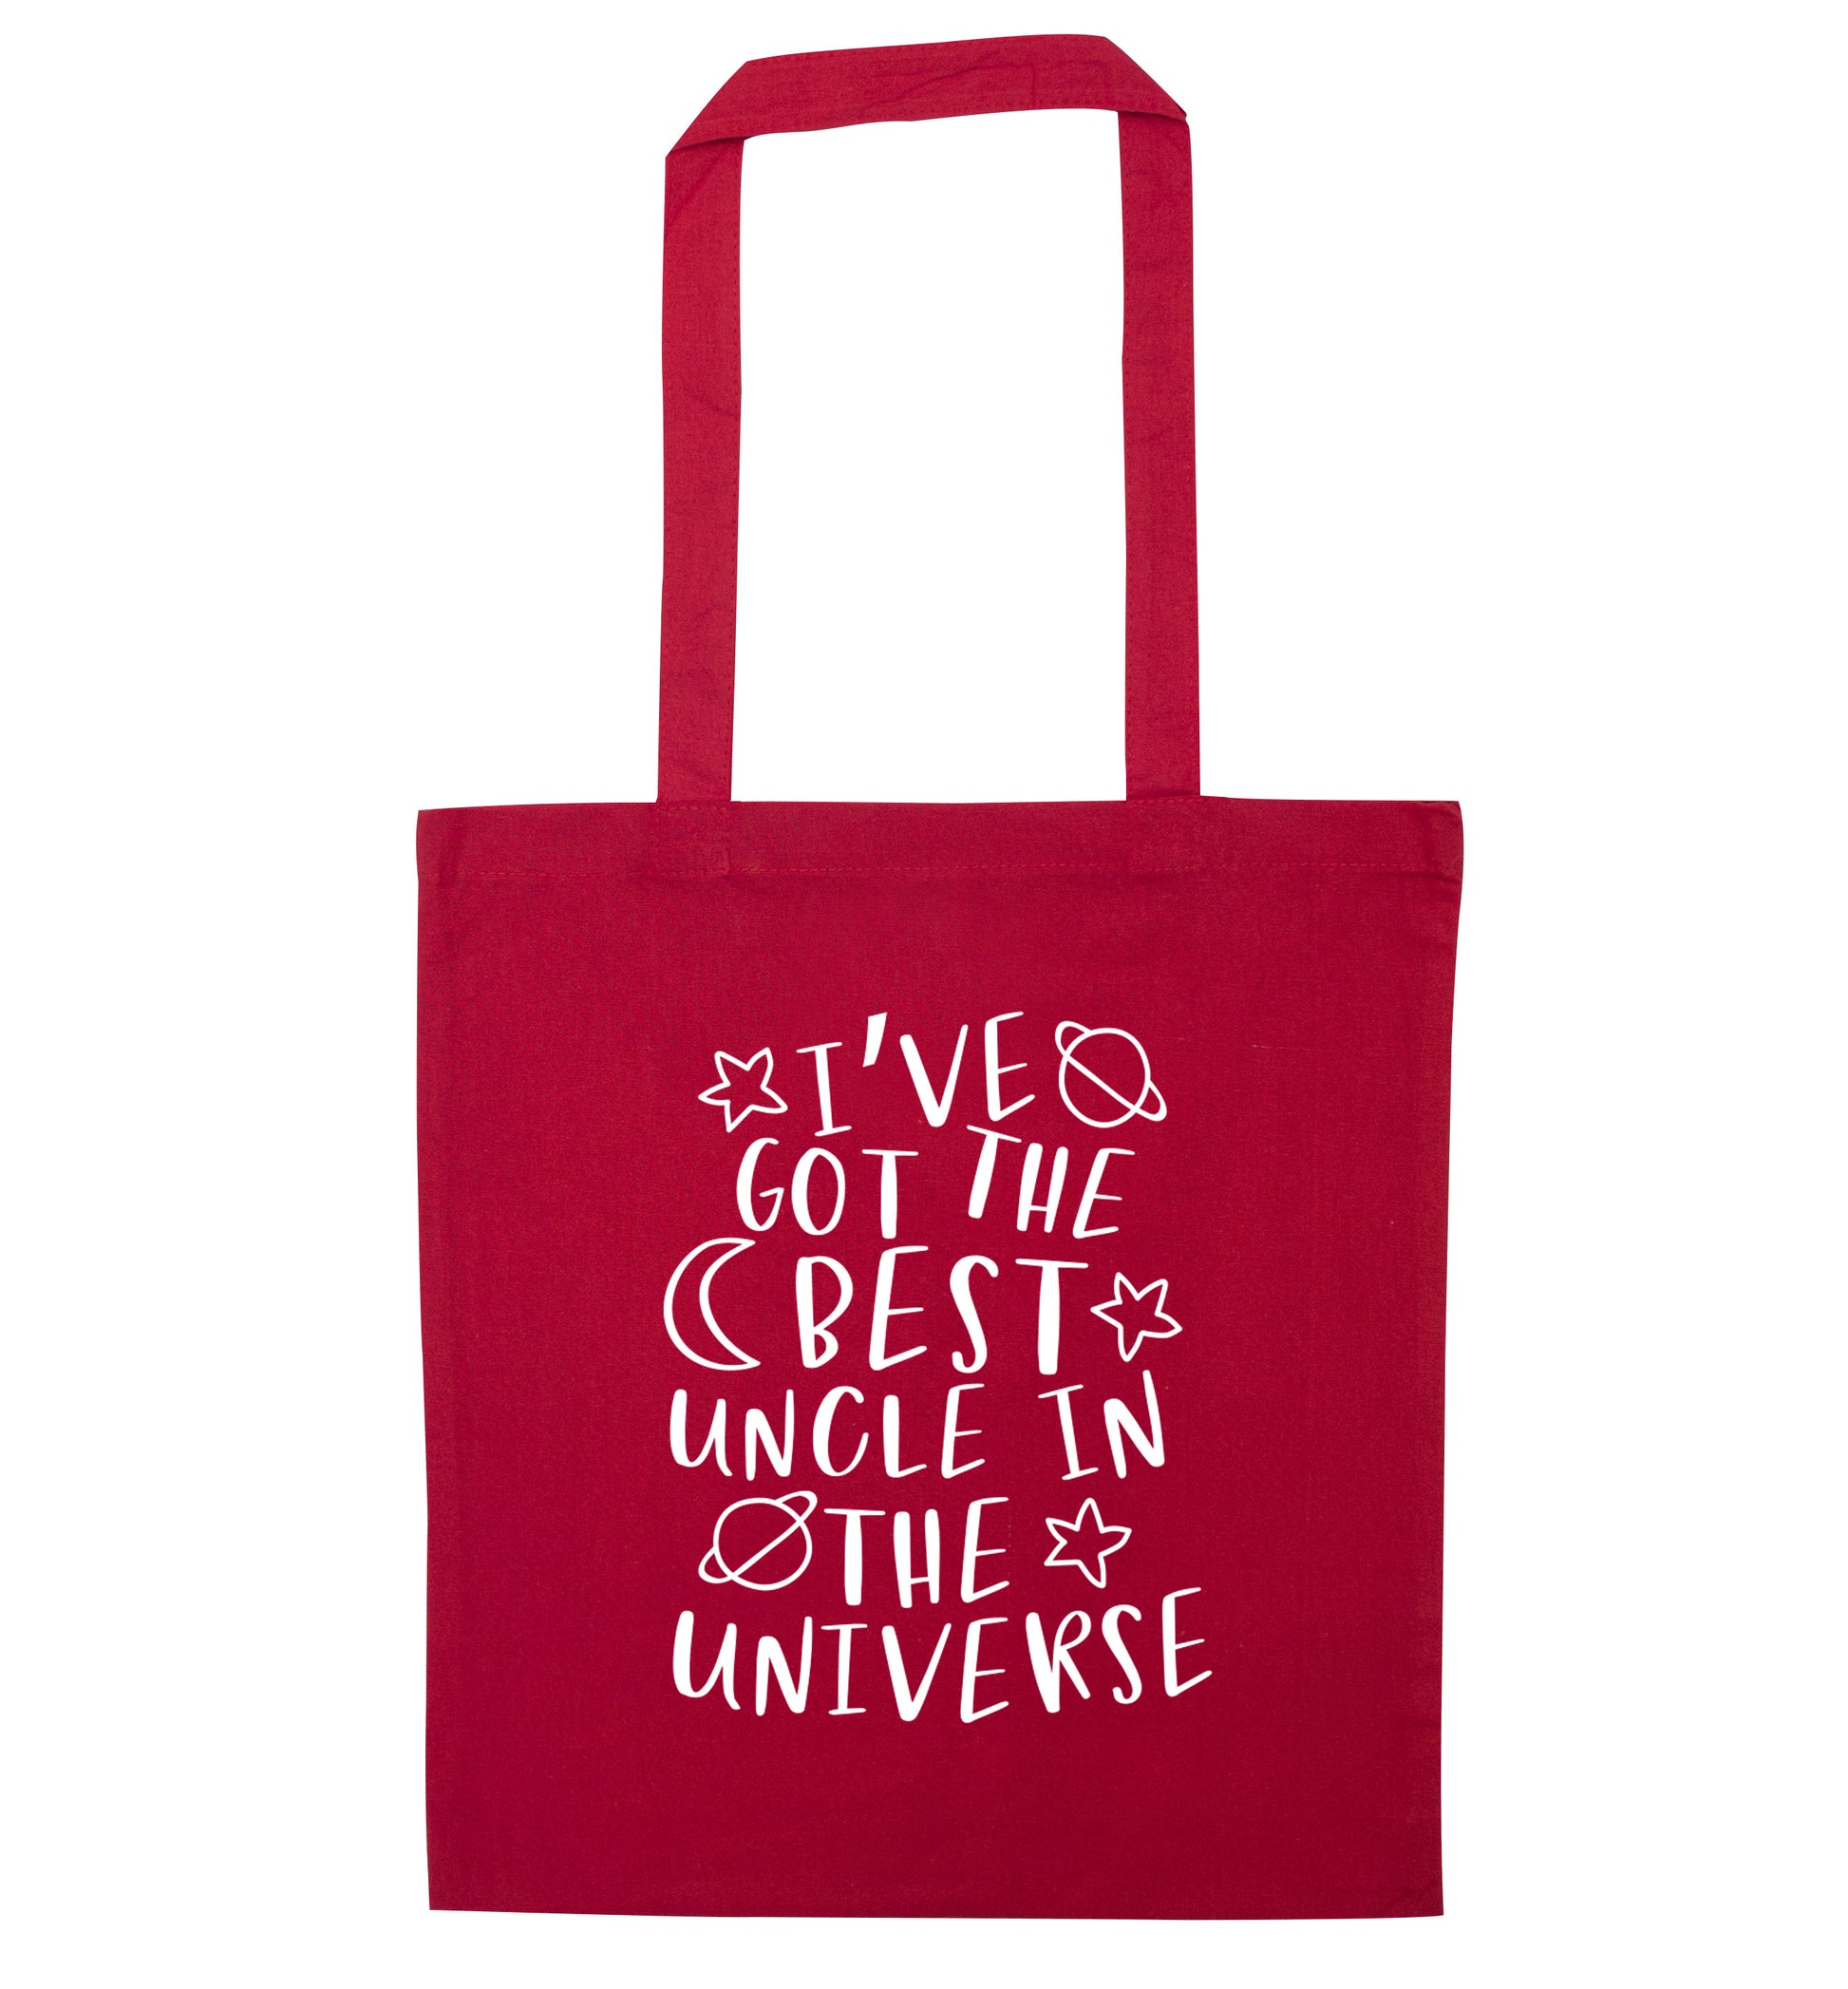 I've got the best uncle in the universe red tote bag